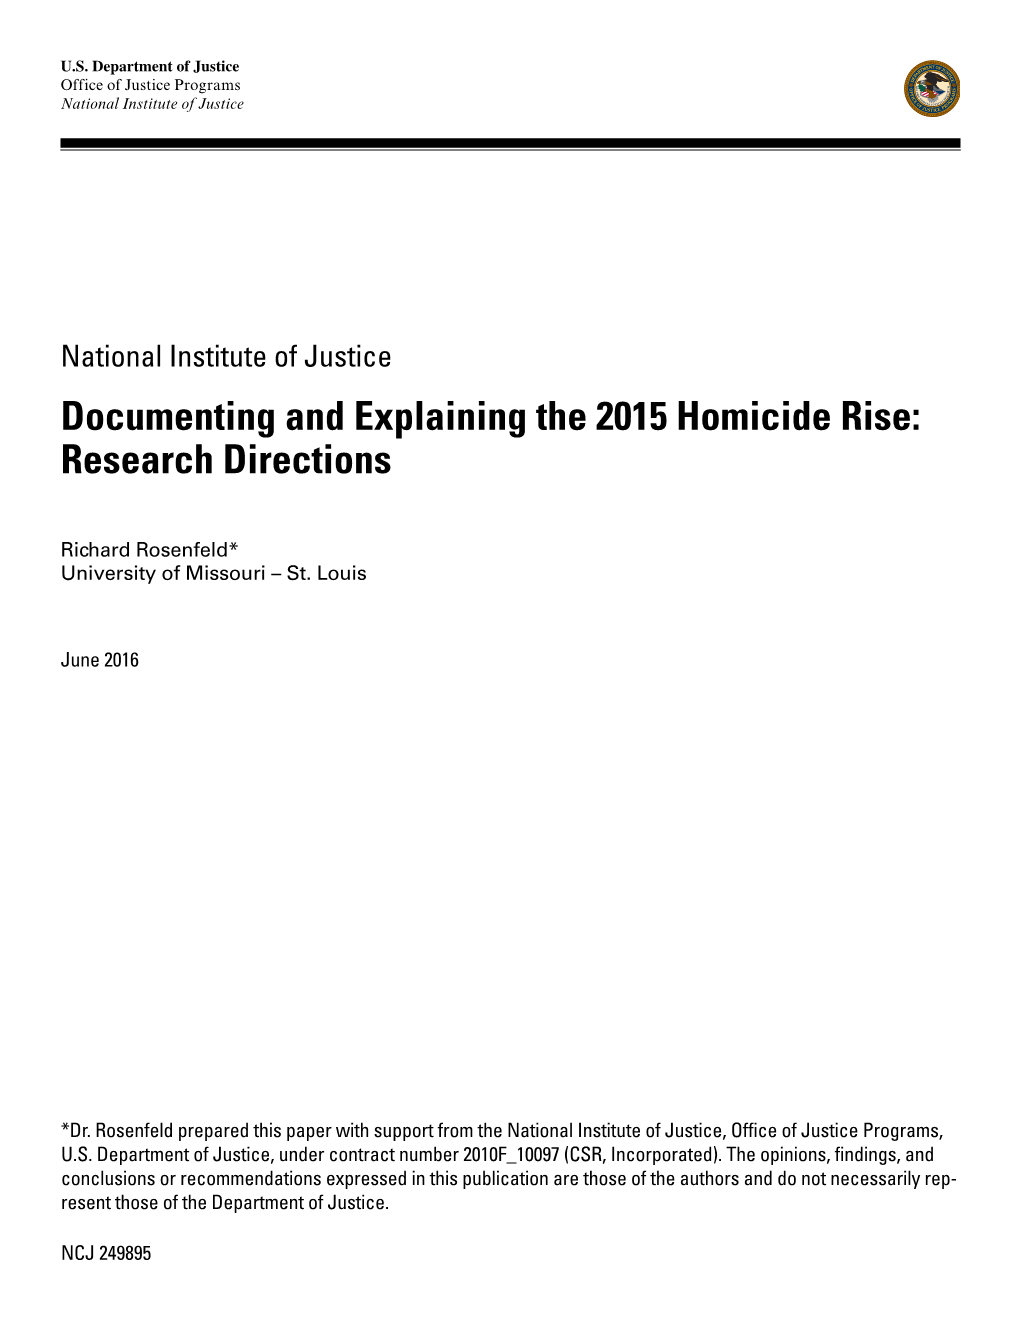 Documenting and Explaining the 2015 Homicide Rise: Research Directions